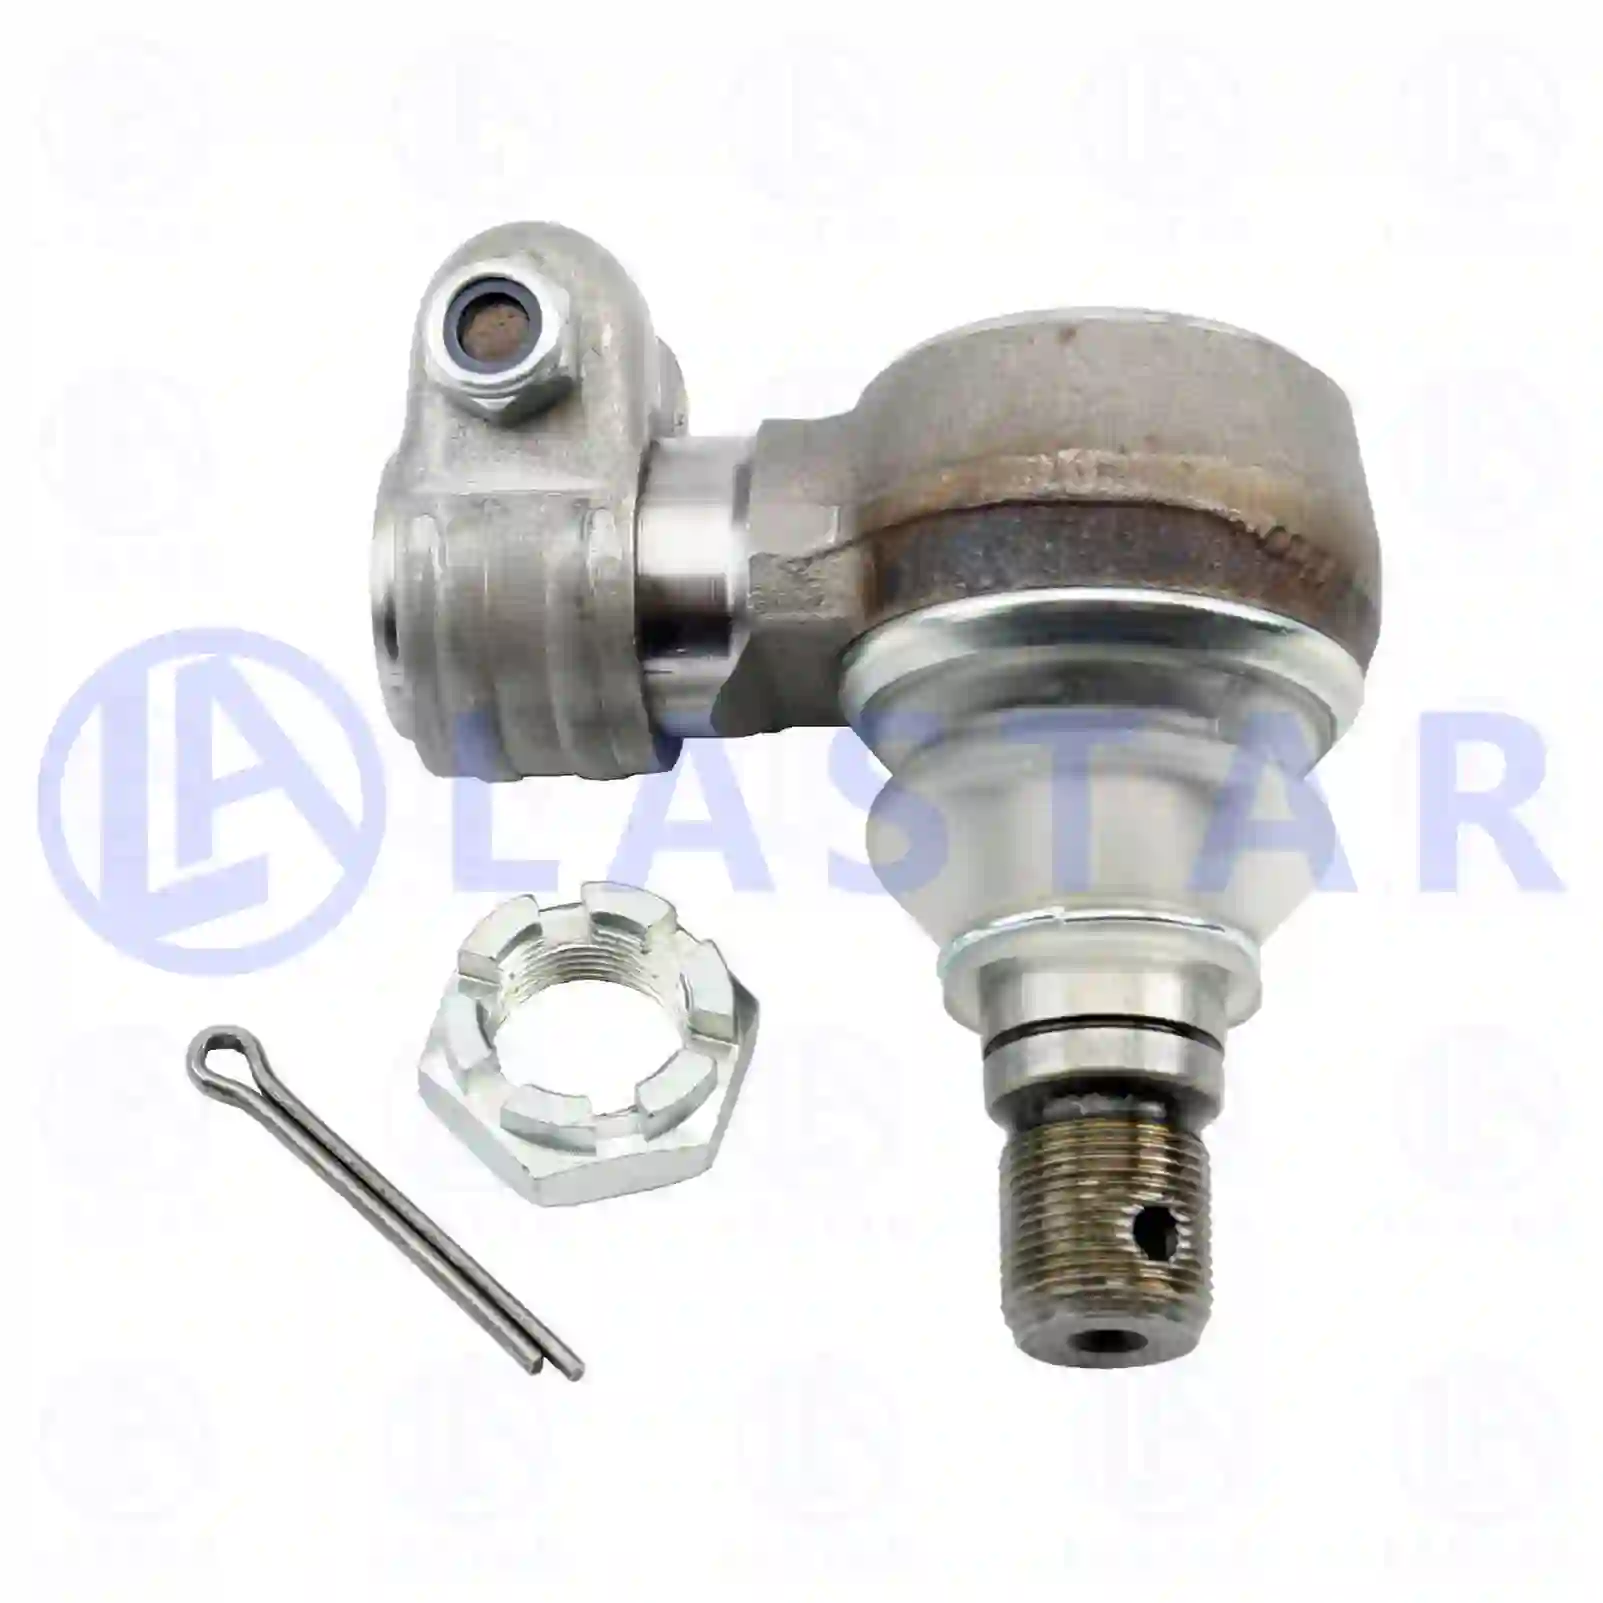 Ball joint, right hand thread, 77730342, 42533102, 42533102, 81467036001, 81953016219, 81953016225, 81953016226, 81953016267, 81953016291, N1011019868, ZG40386-0008 ||  77730342 Lastar Spare Part | Truck Spare Parts, Auotomotive Spare Parts Ball joint, right hand thread, 77730342, 42533102, 42533102, 81467036001, 81953016219, 81953016225, 81953016226, 81953016267, 81953016291, N1011019868, ZG40386-0008 ||  77730342 Lastar Spare Part | Truck Spare Parts, Auotomotive Spare Parts